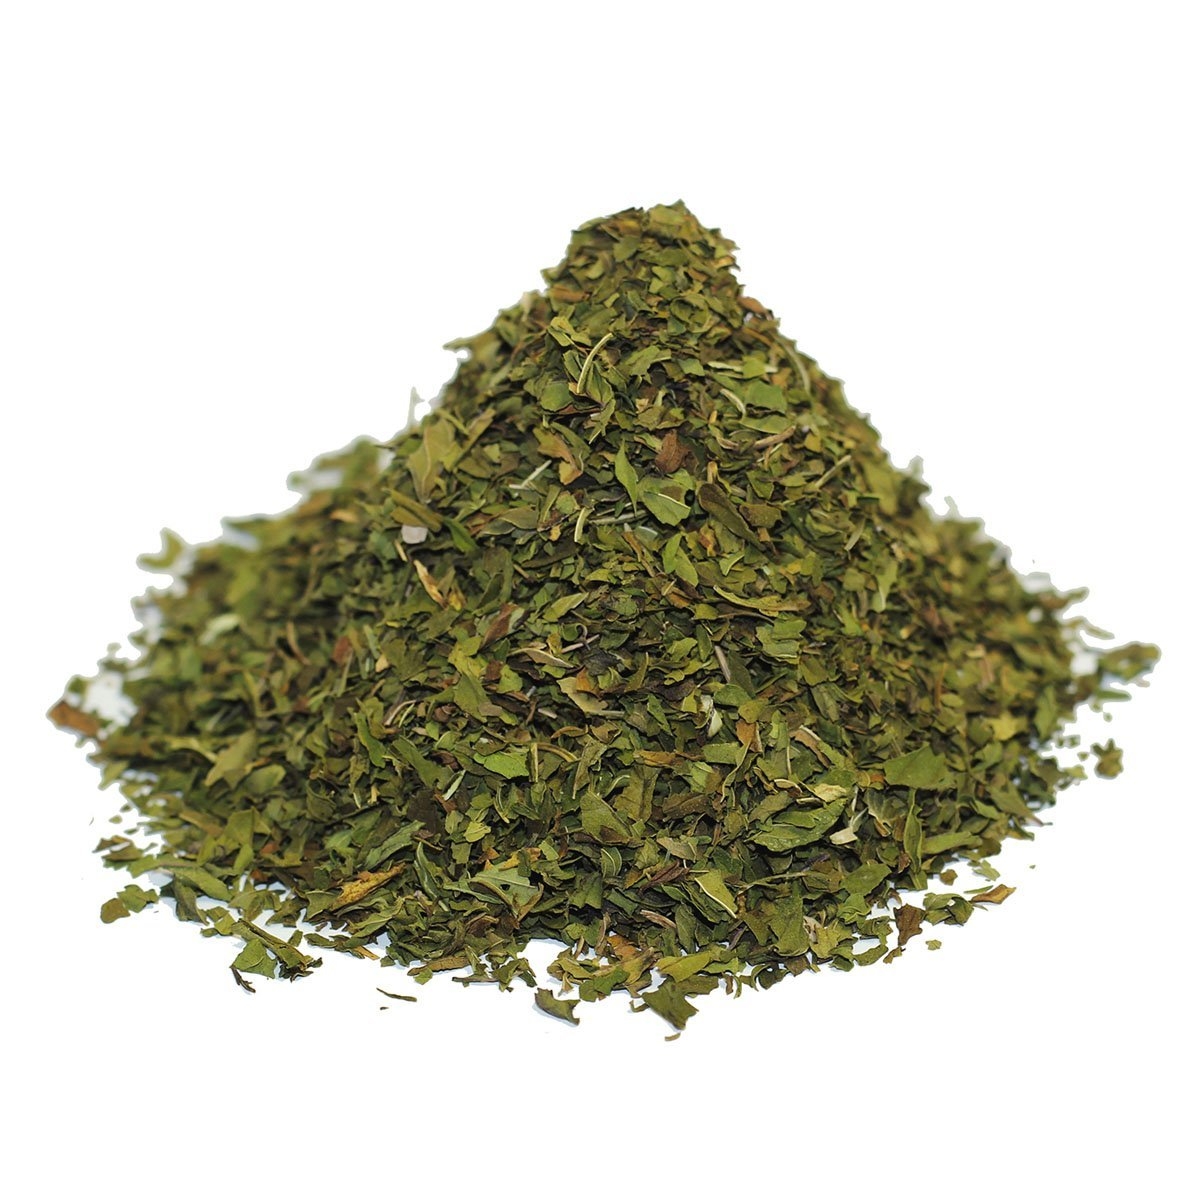 Dried peppermint